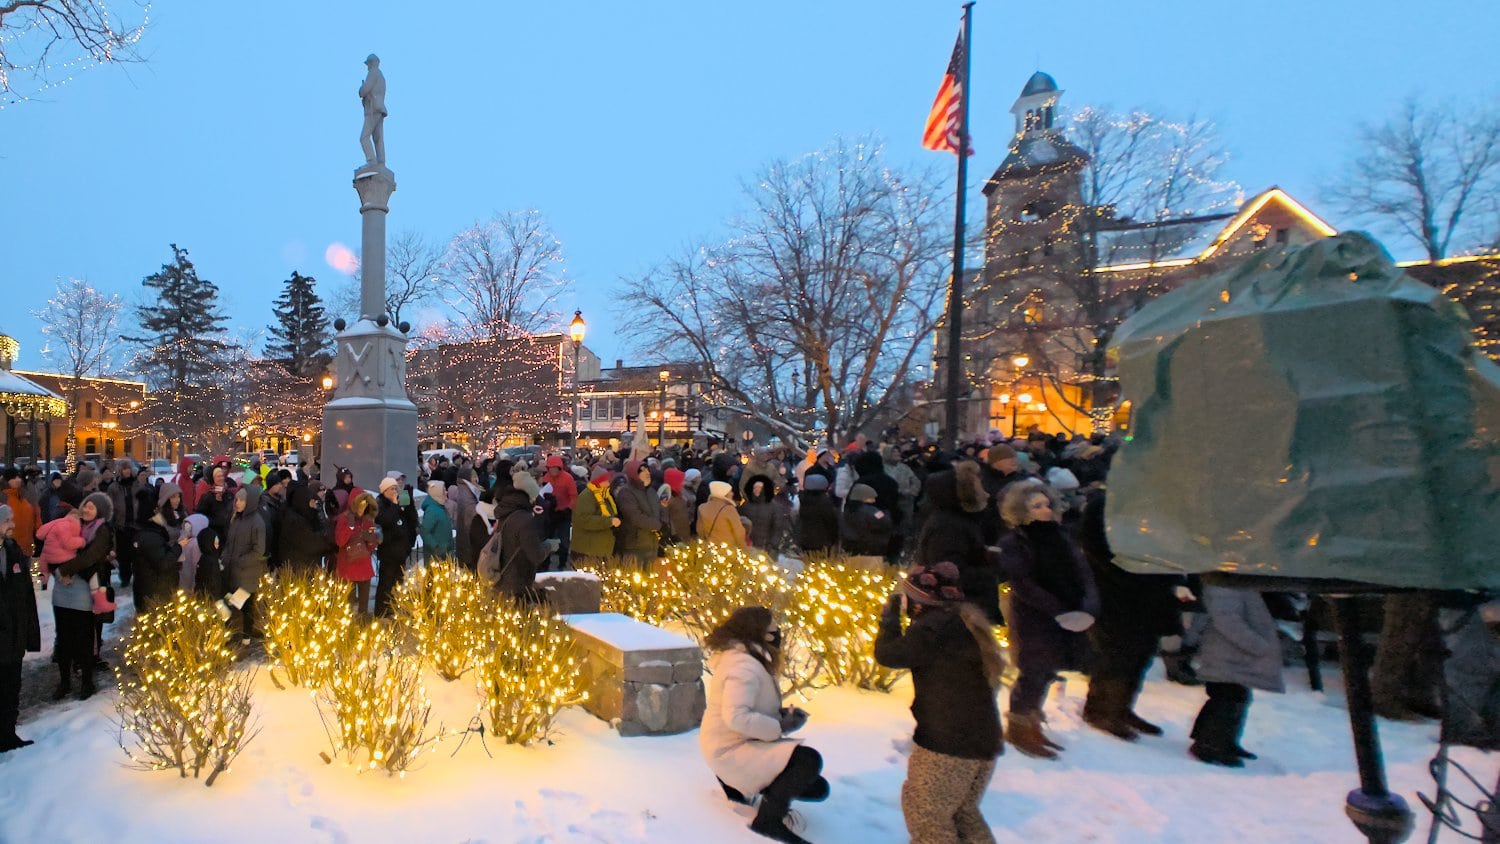 Christmas lights glowing against fallen snow with people gathering for groundhog day.